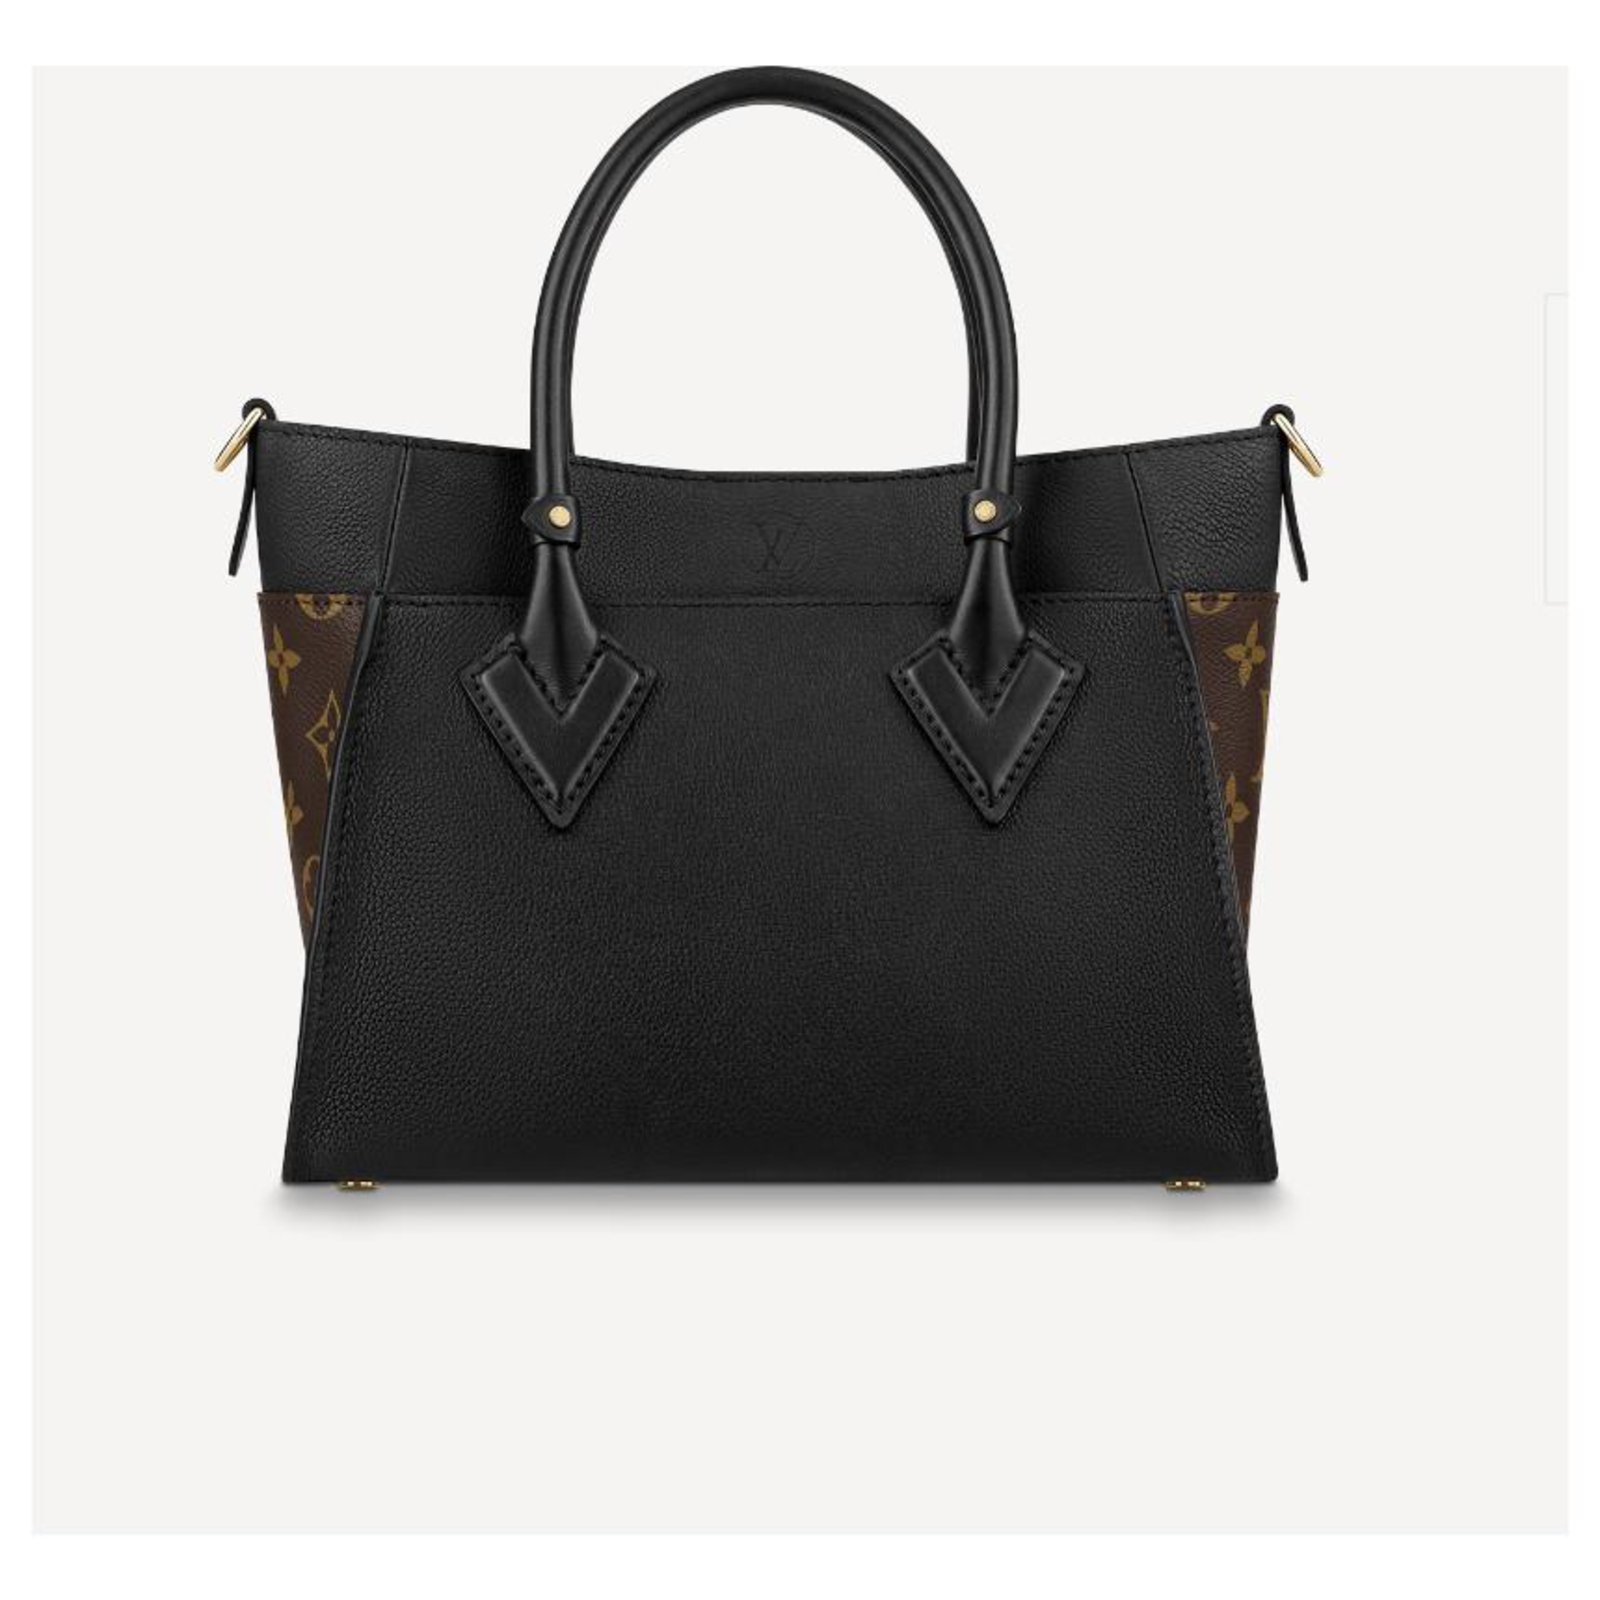 On My Side PM Calfskin Tote Bag